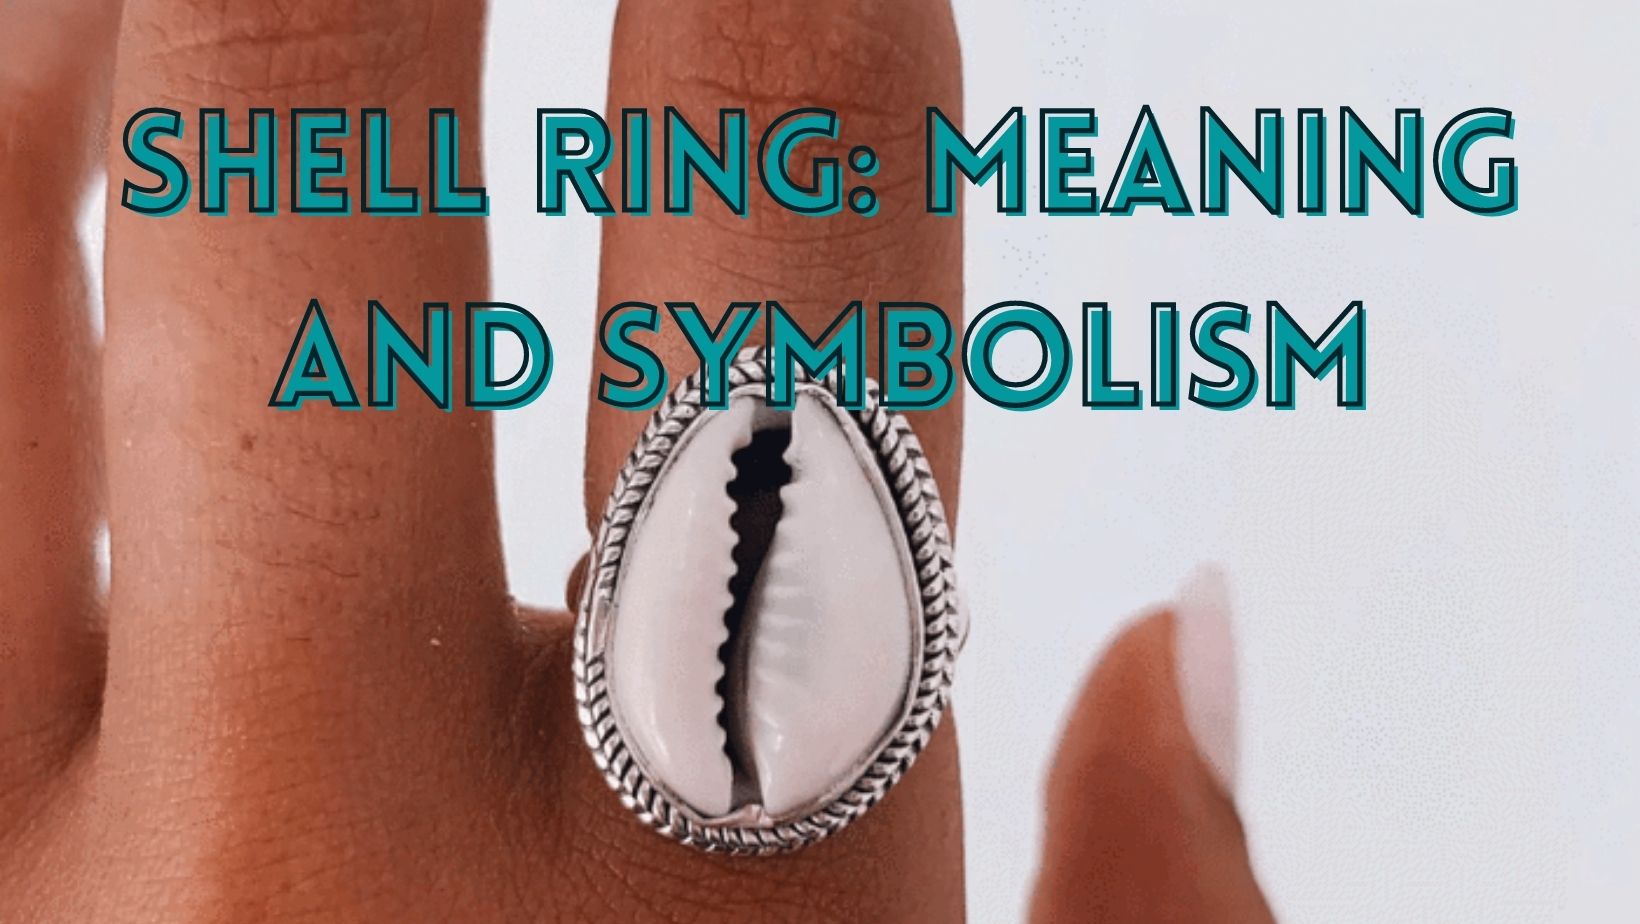 Shell Ring: Meaning and Symbolism